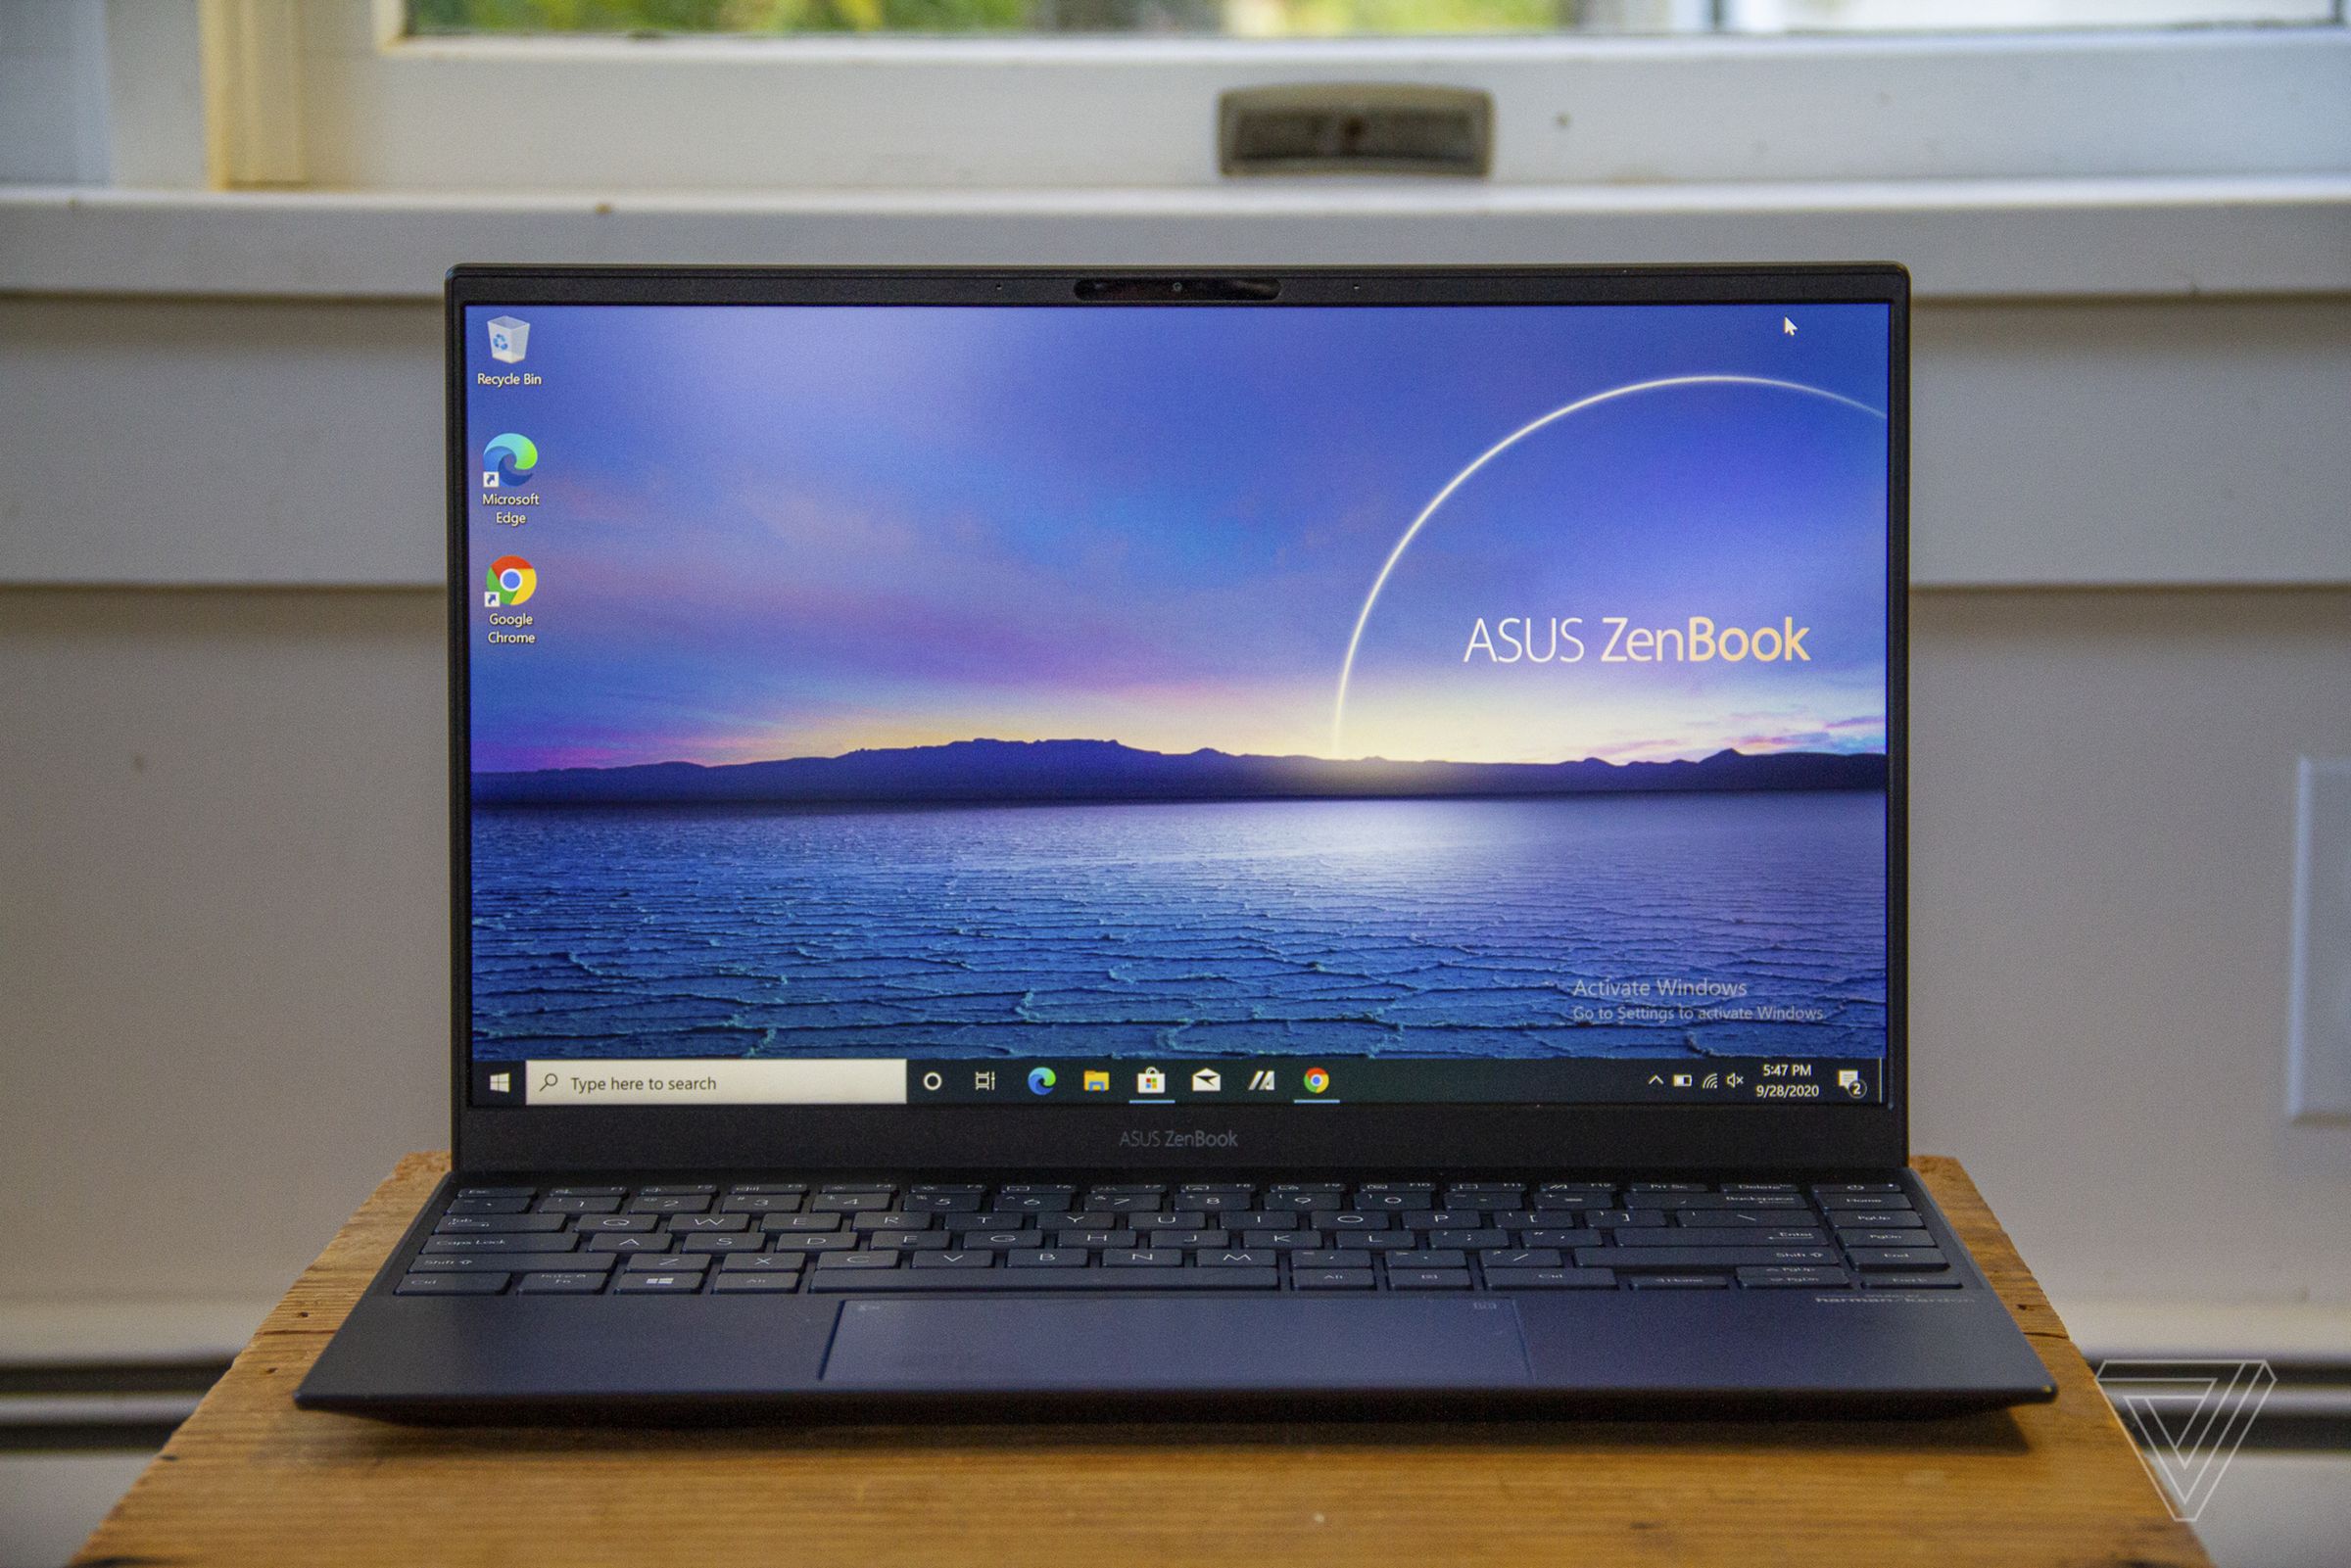 The Asus Zenbook 14 open from the front.